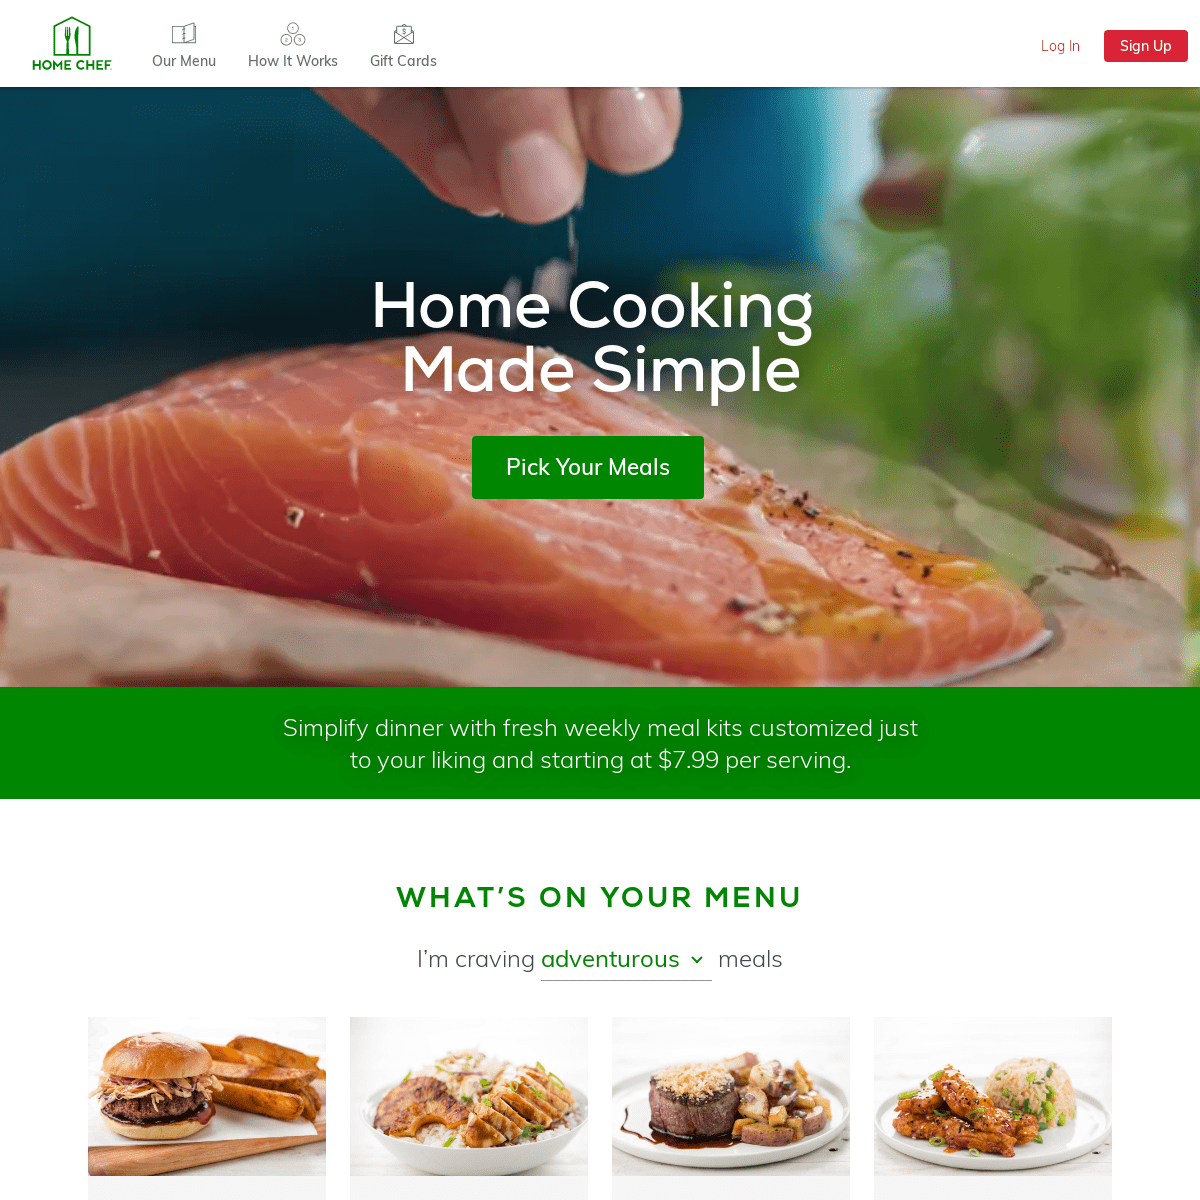 Meal Delivery Service - Fresh Weekly Meal Kit Delivery - Home Chef